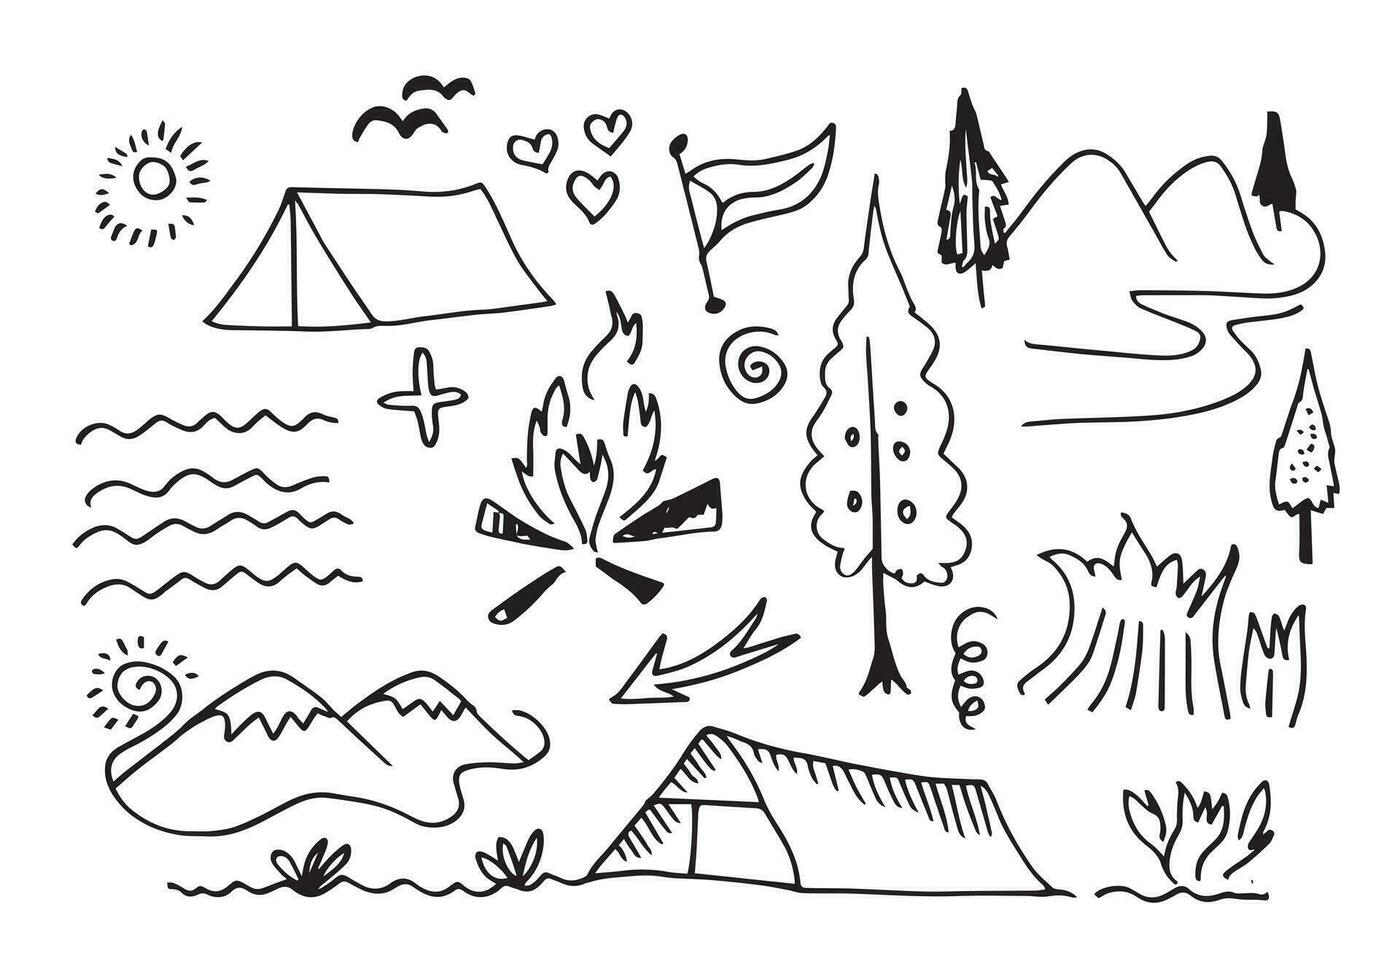 Hand drawn camping and hiking elements, isolated on white background.Camping Doodle Icons Sketch Hand Made. vector